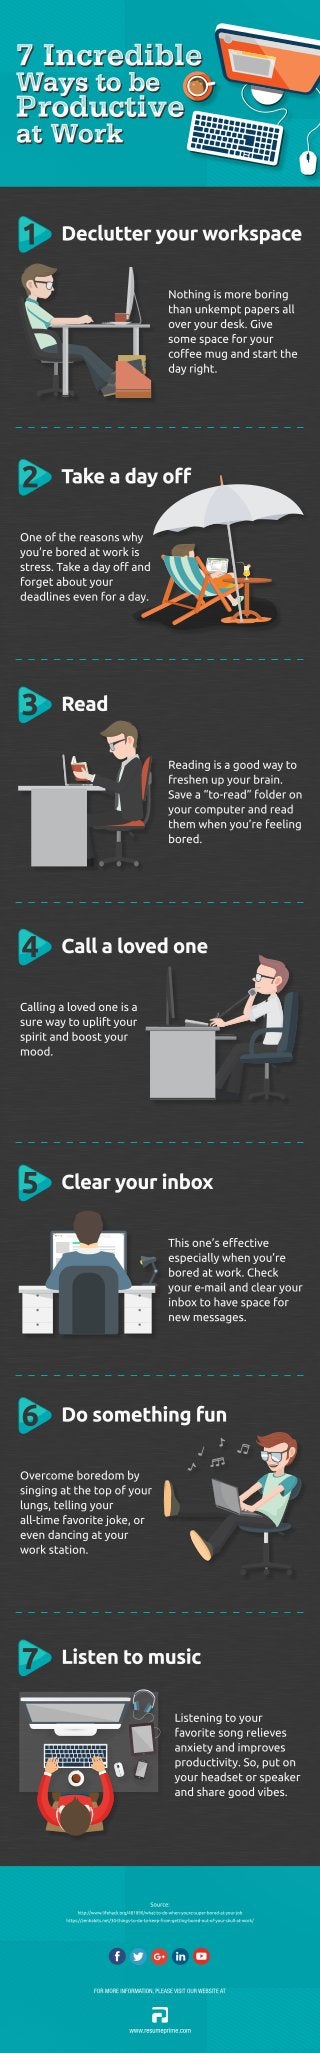 7 Incredible Ways to be Productive at Work [Infographic]